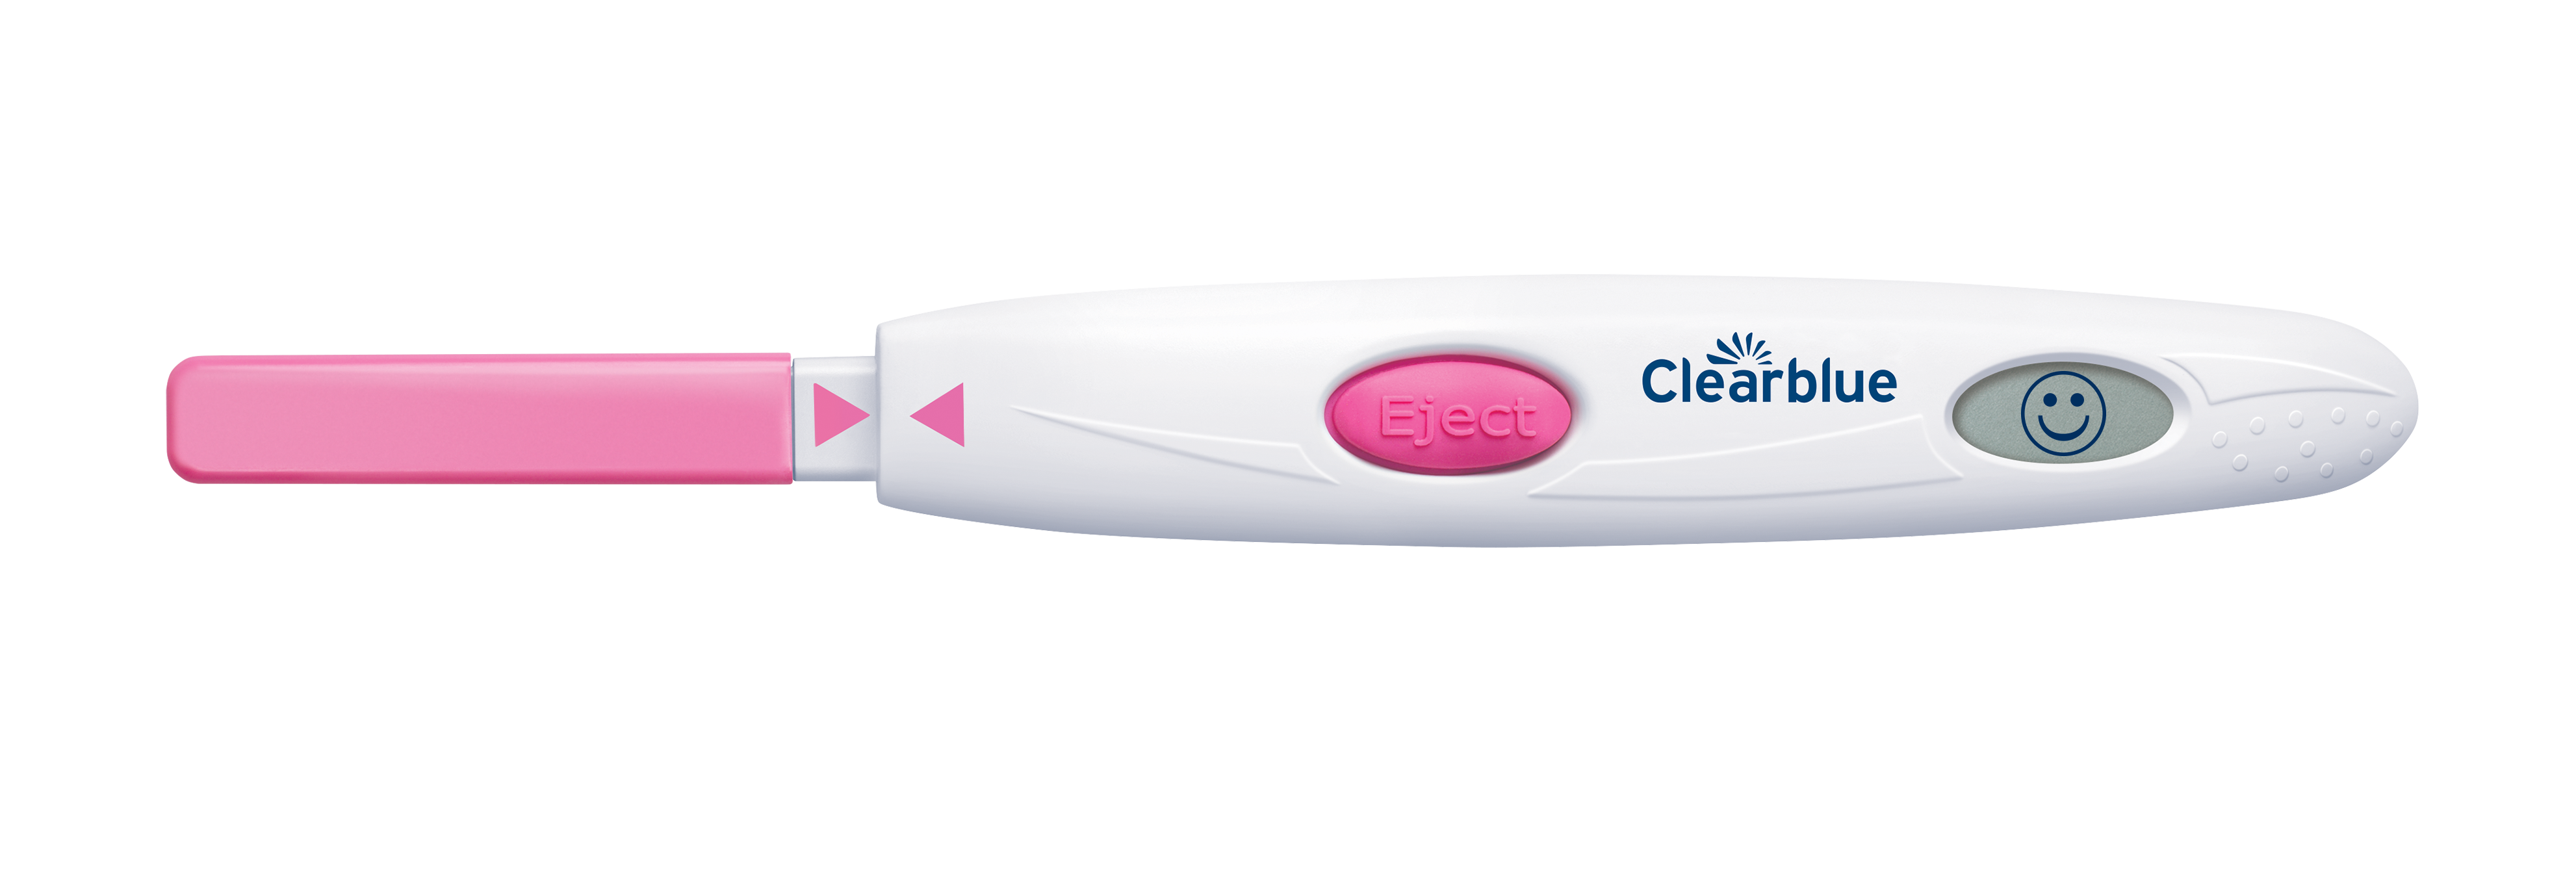 Clearblue® Digital Ovulation Test